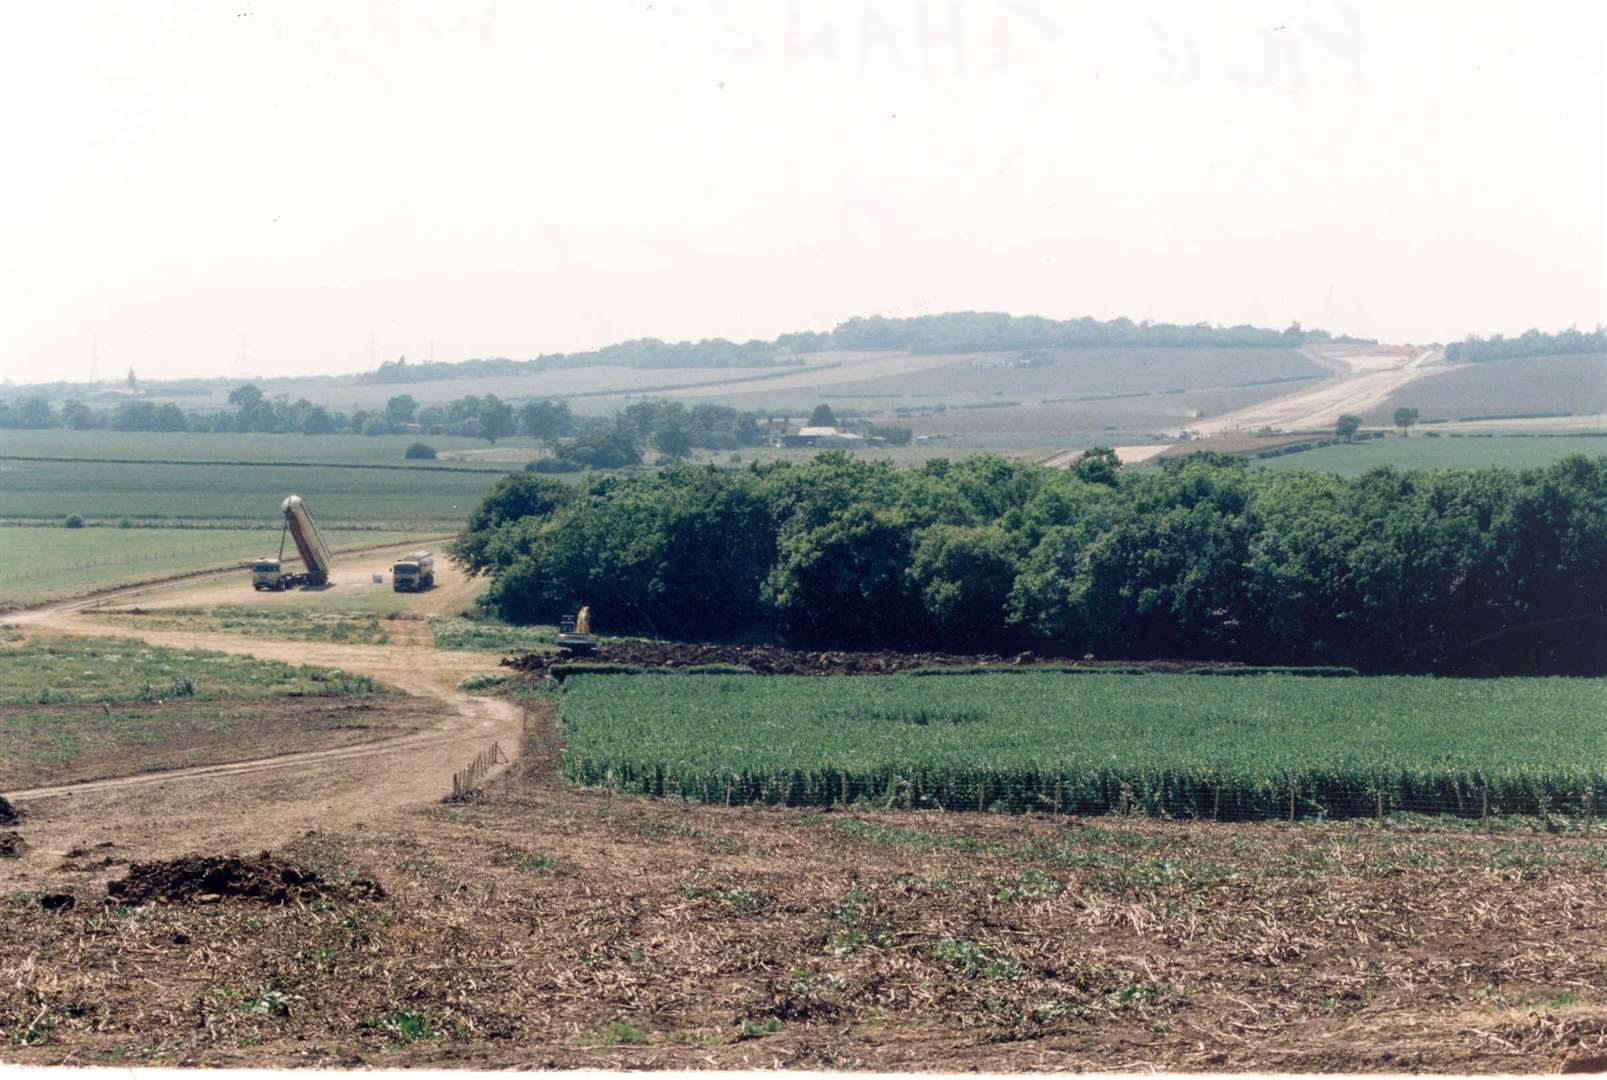 Construction of the new Thanet Way